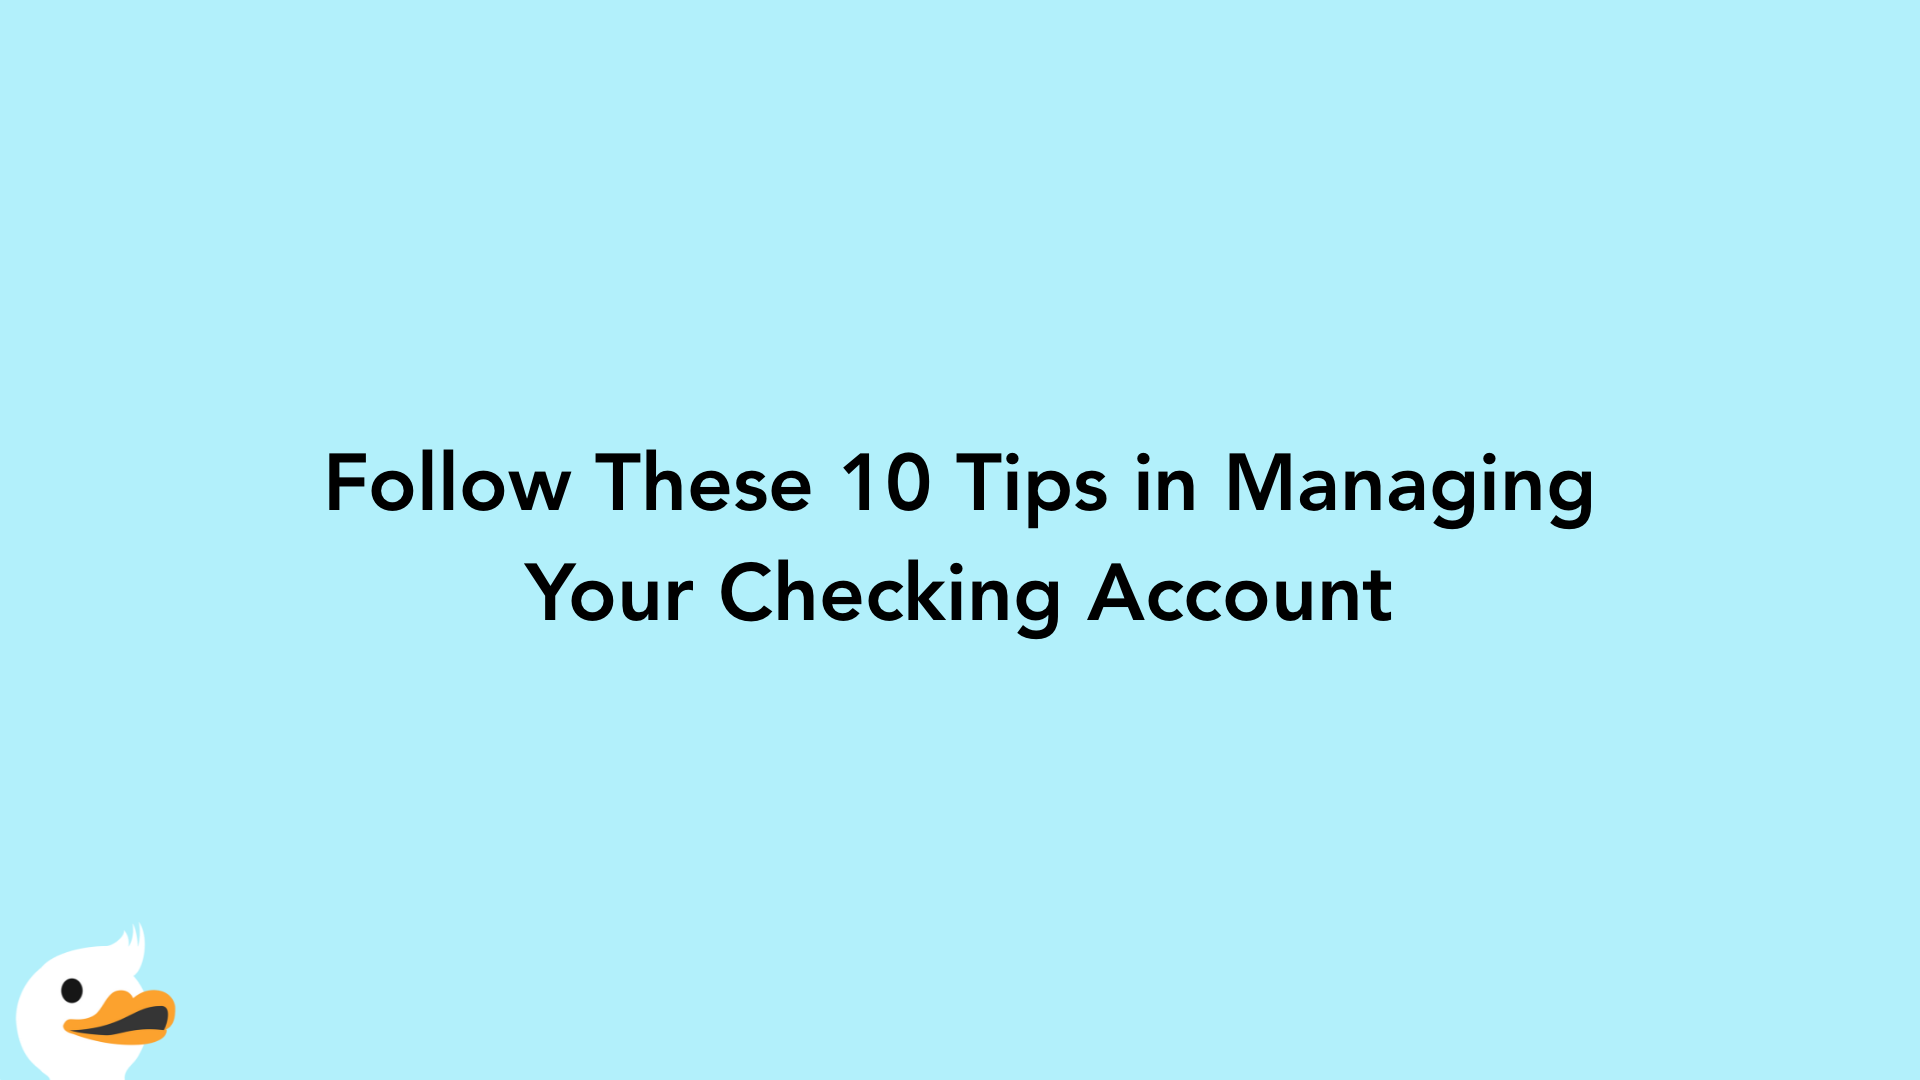 Follow These 10 Tips in Managing Your Checking Account